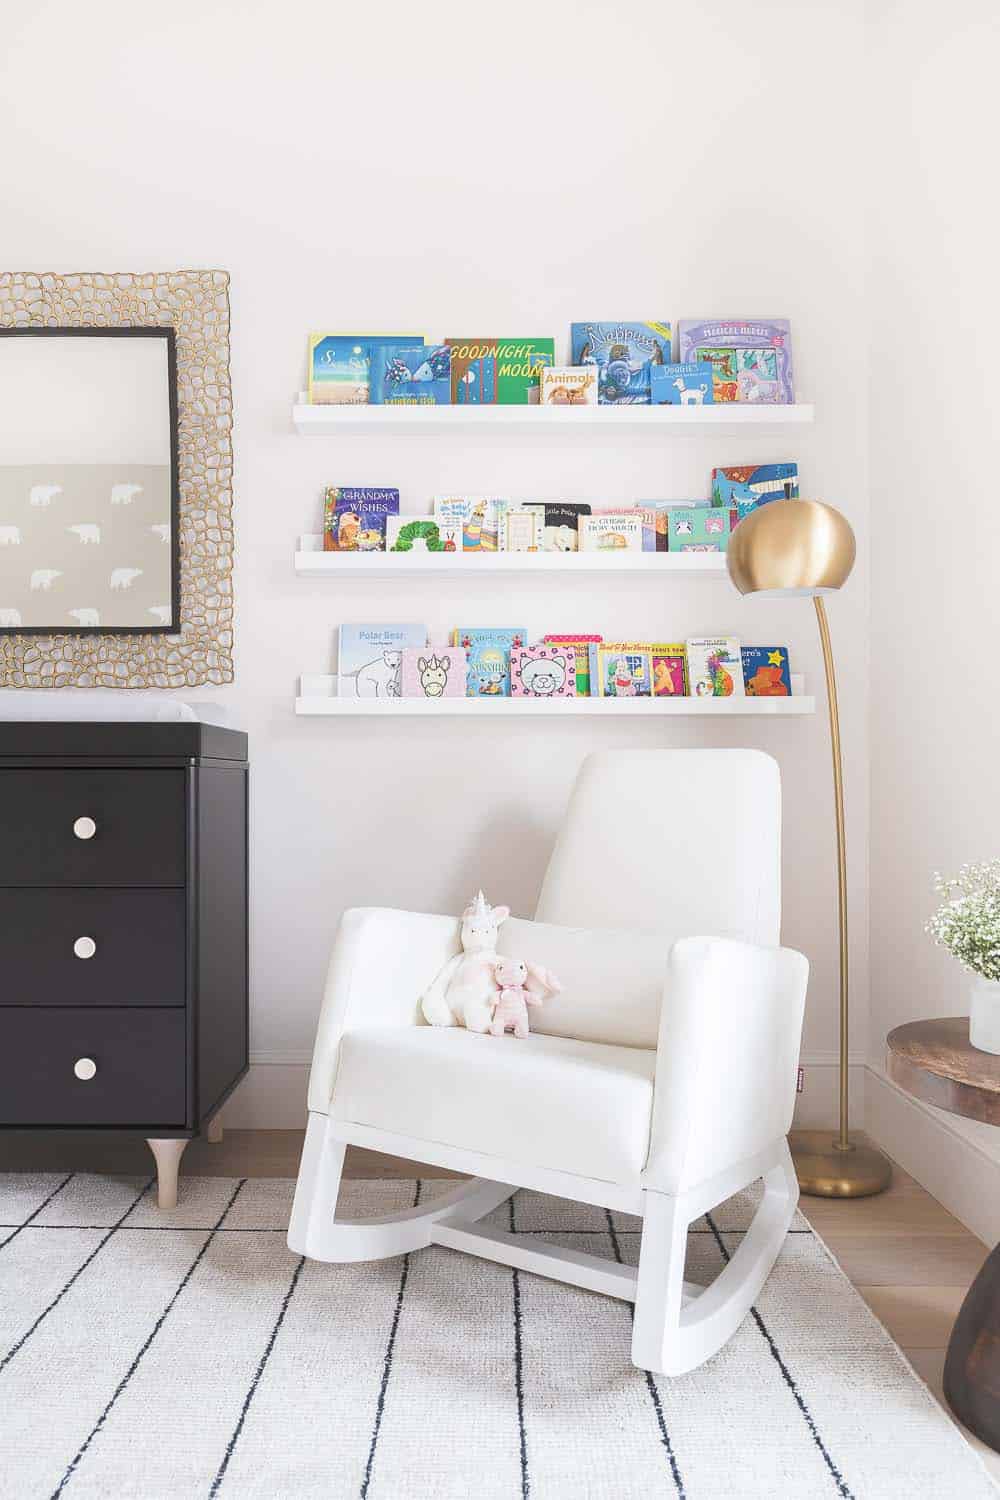 transitional style nursery with a reading nook